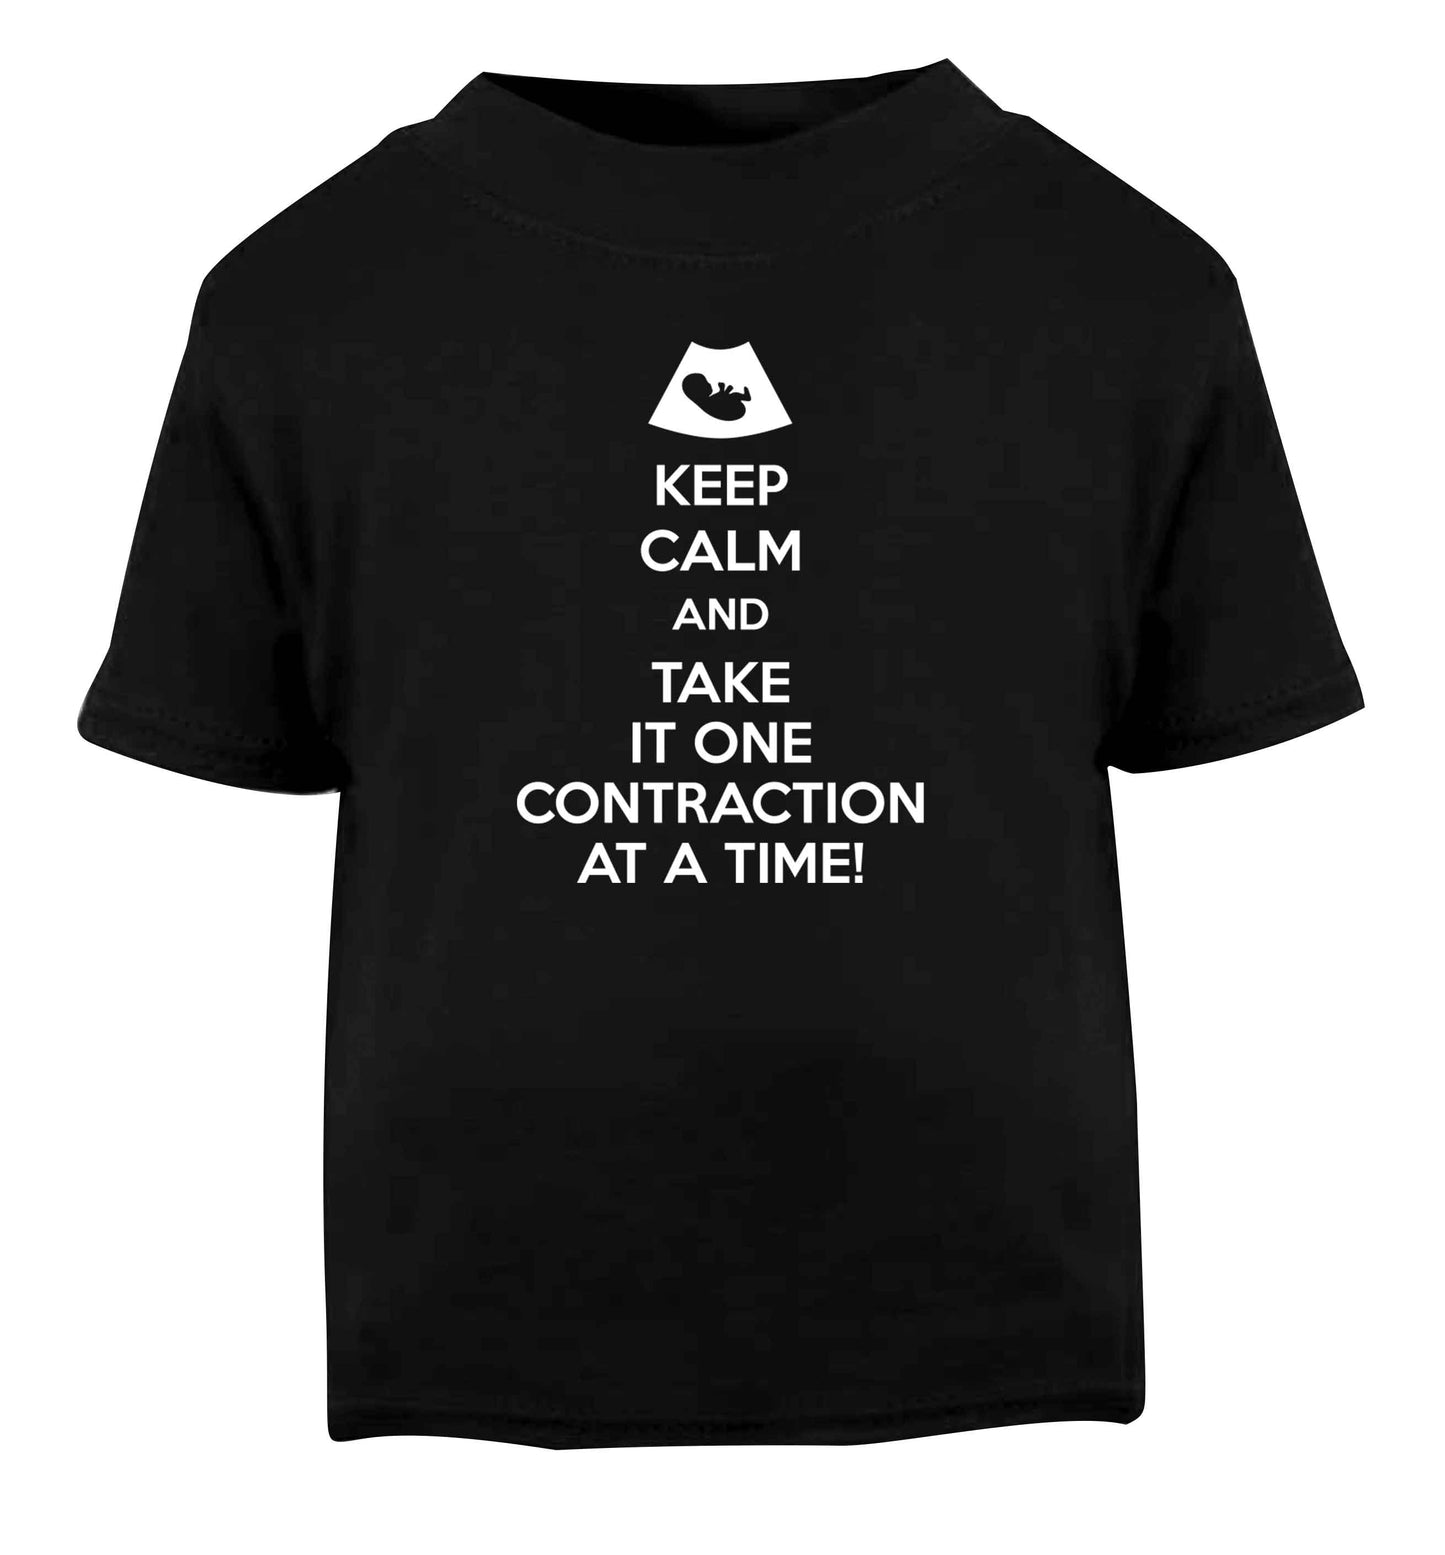 Keep calm and take it one contraction at a time Black Baby Toddler Tshirt 2 years